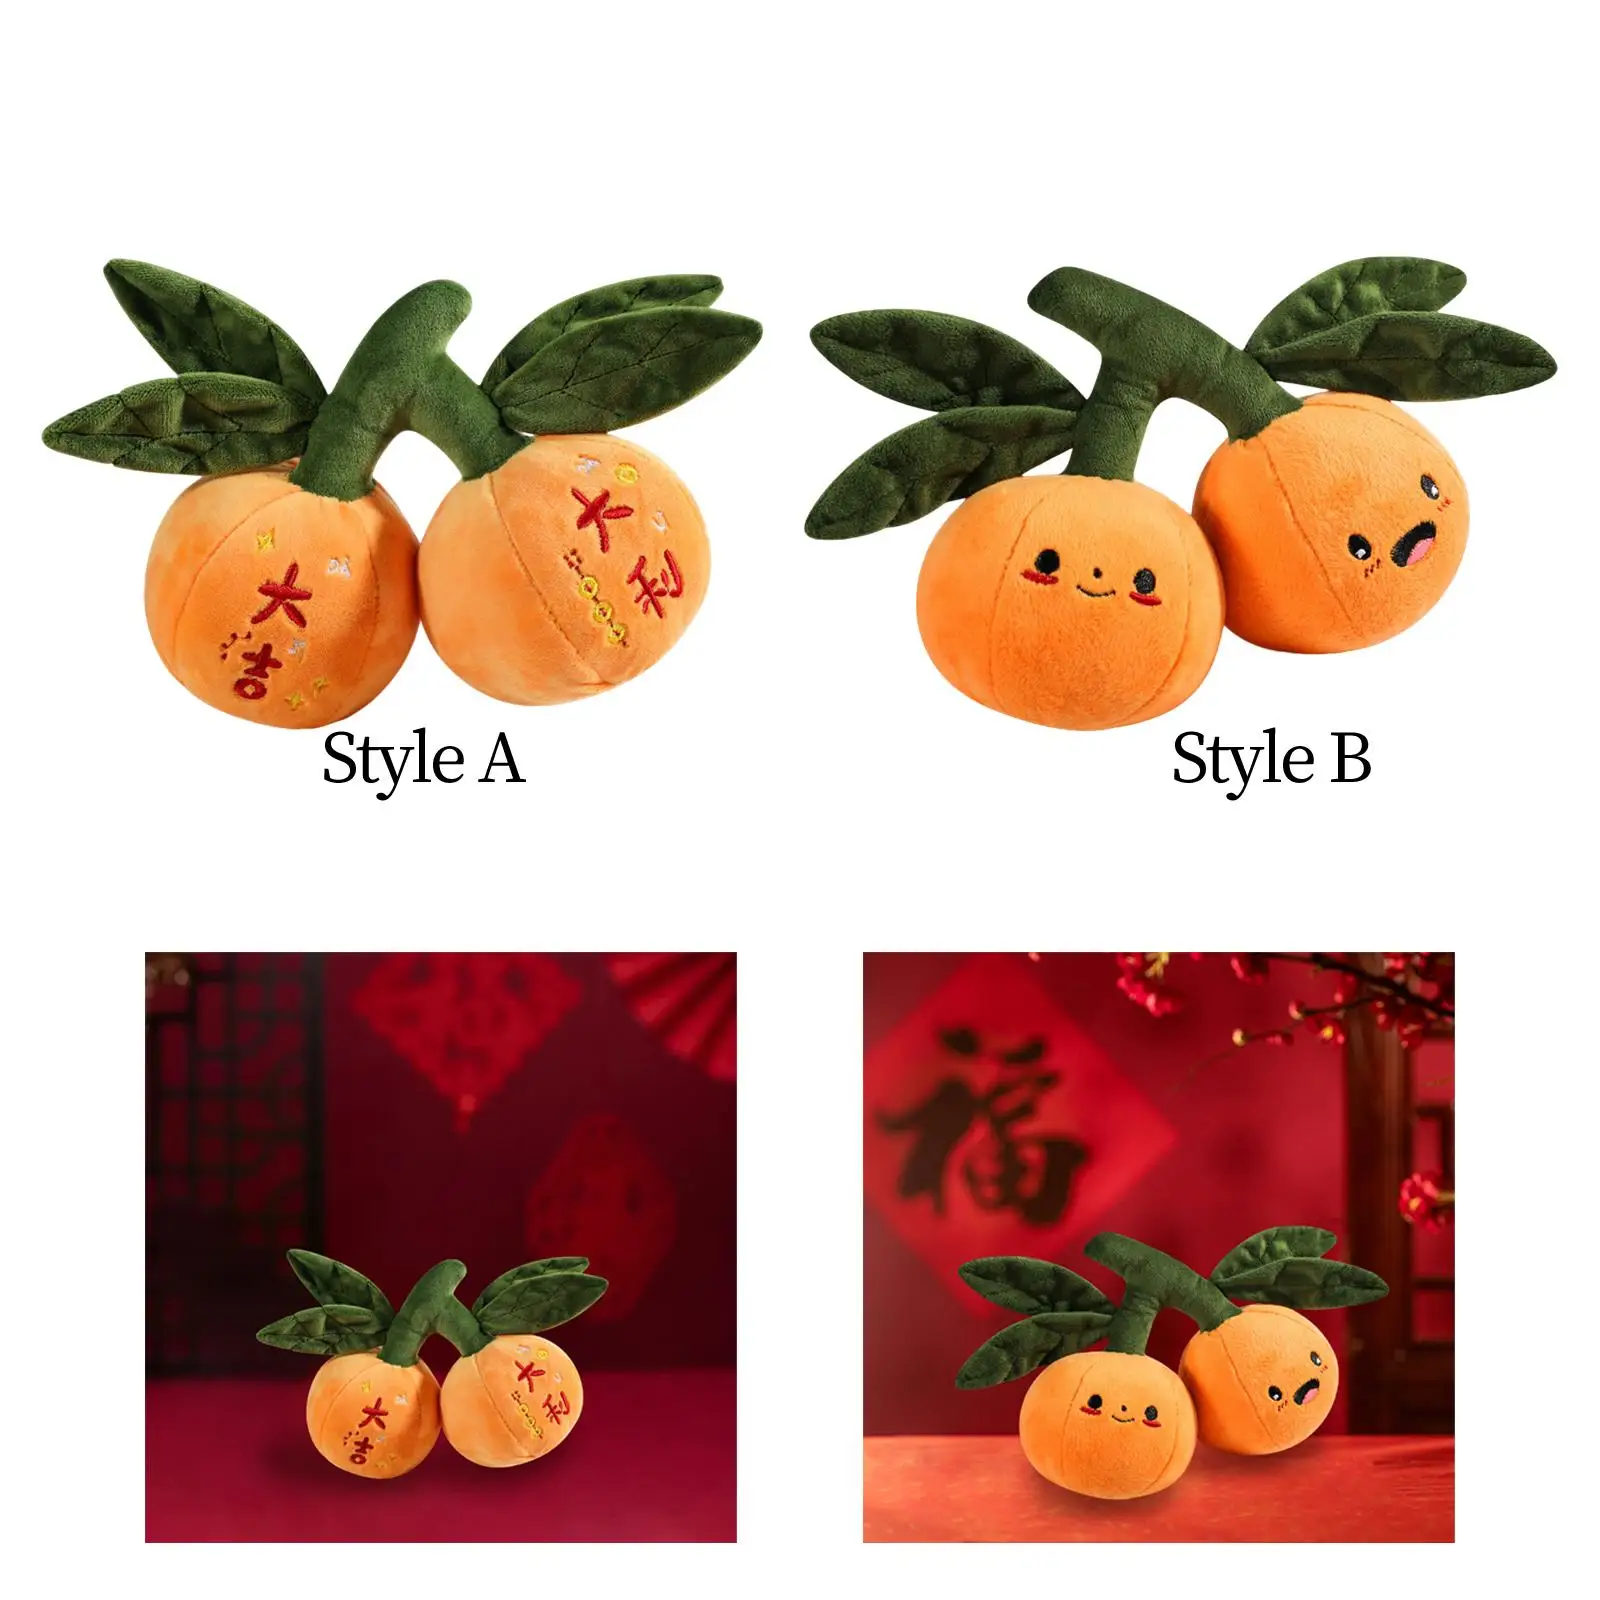 Stuffed Tangerine Toys Gifts Pretend Play Game for Car Bedroom Decorative